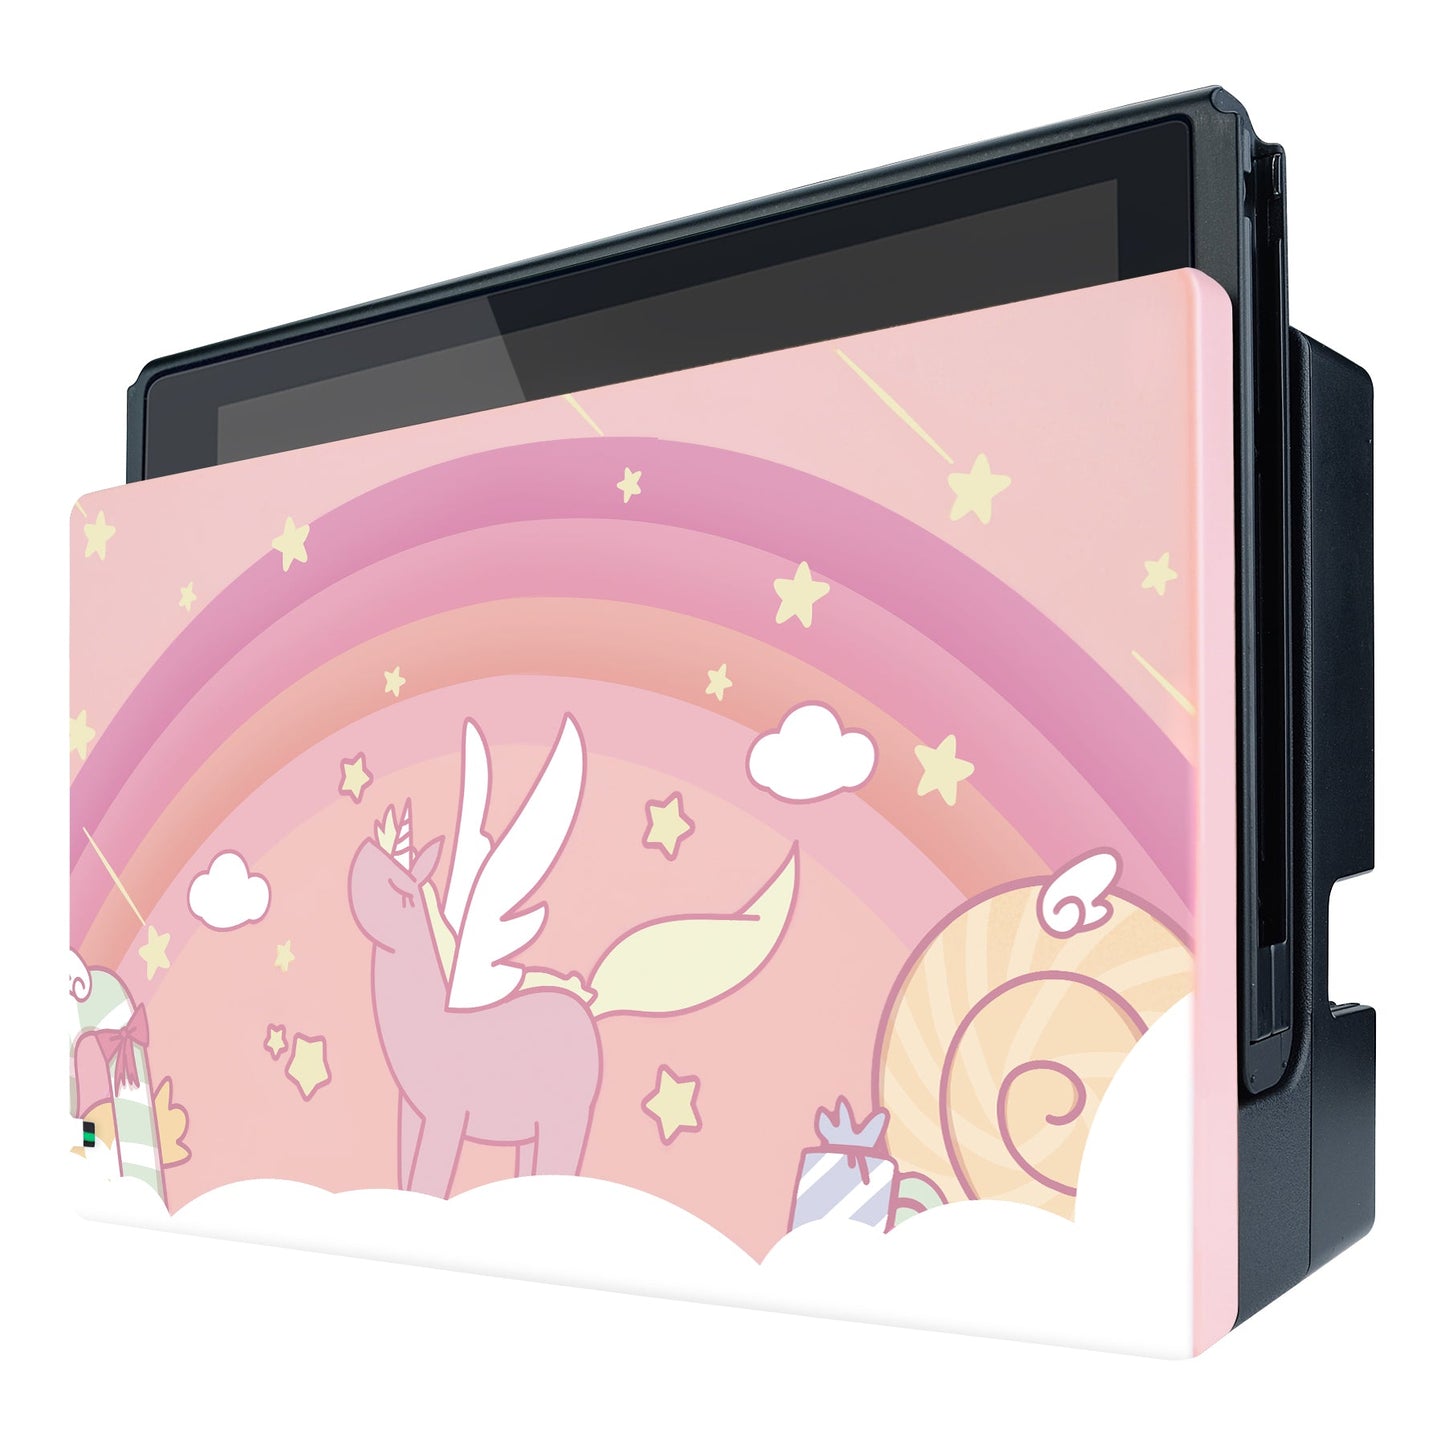 PlayVital Candy Rainbow Unicorn Patterned Custom Protective Case for NS Switch Charging Dock, Dust Anti Scratch Dust Hard Cover for NS Switch Dock - Dock NOT Included - NTG7007 PlayVital